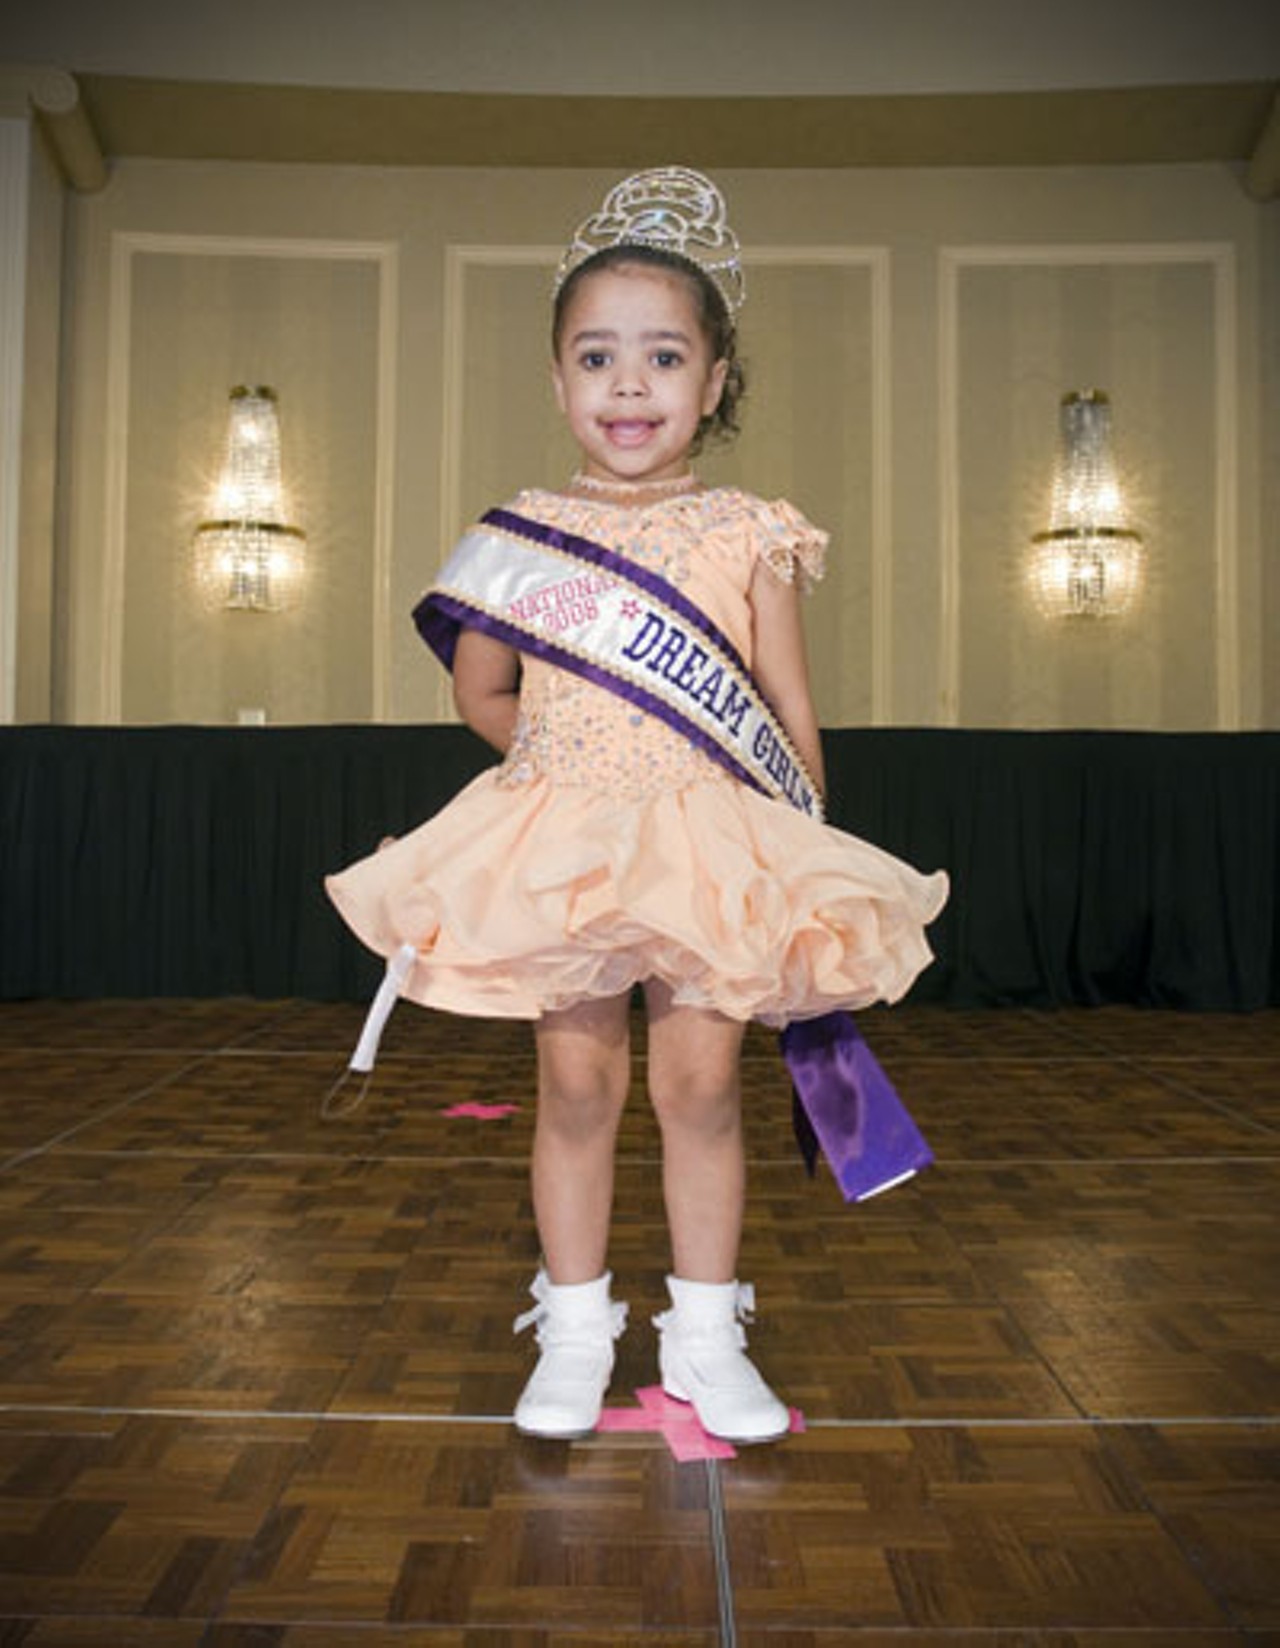 Keely Zack, three-years-old from Texas, was named Baby/Tiny Miss Dream Girls USA Supreme Spokesmodel. I never actually heard her speak.